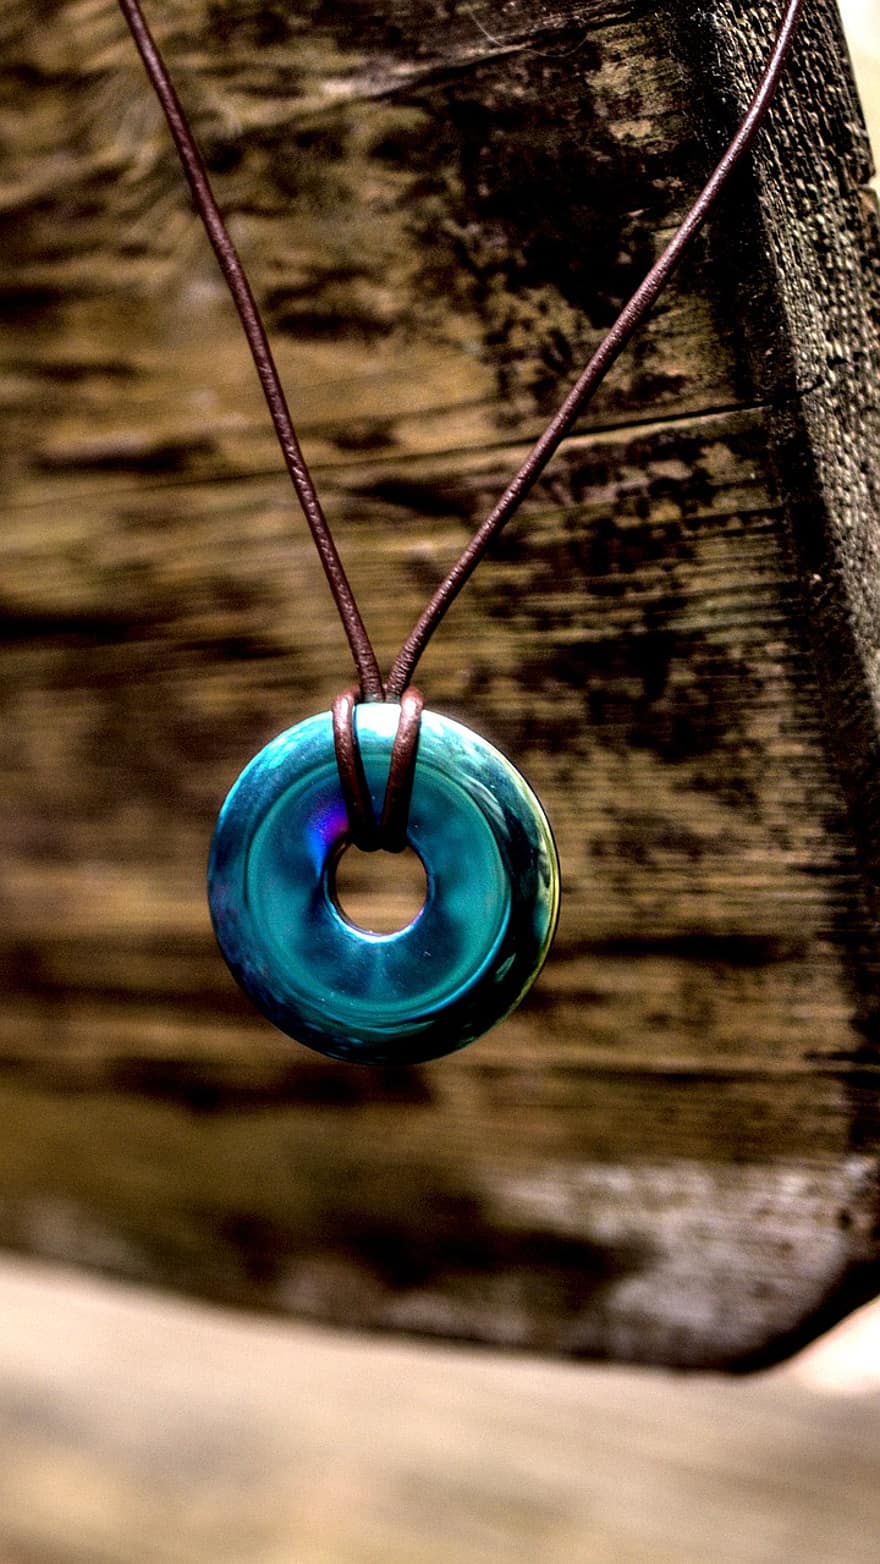 Talisman, Necklace, Jewelry, Blue Talisman, Medalion, Accessory, close-up, wood, backgrounds, single object, blue